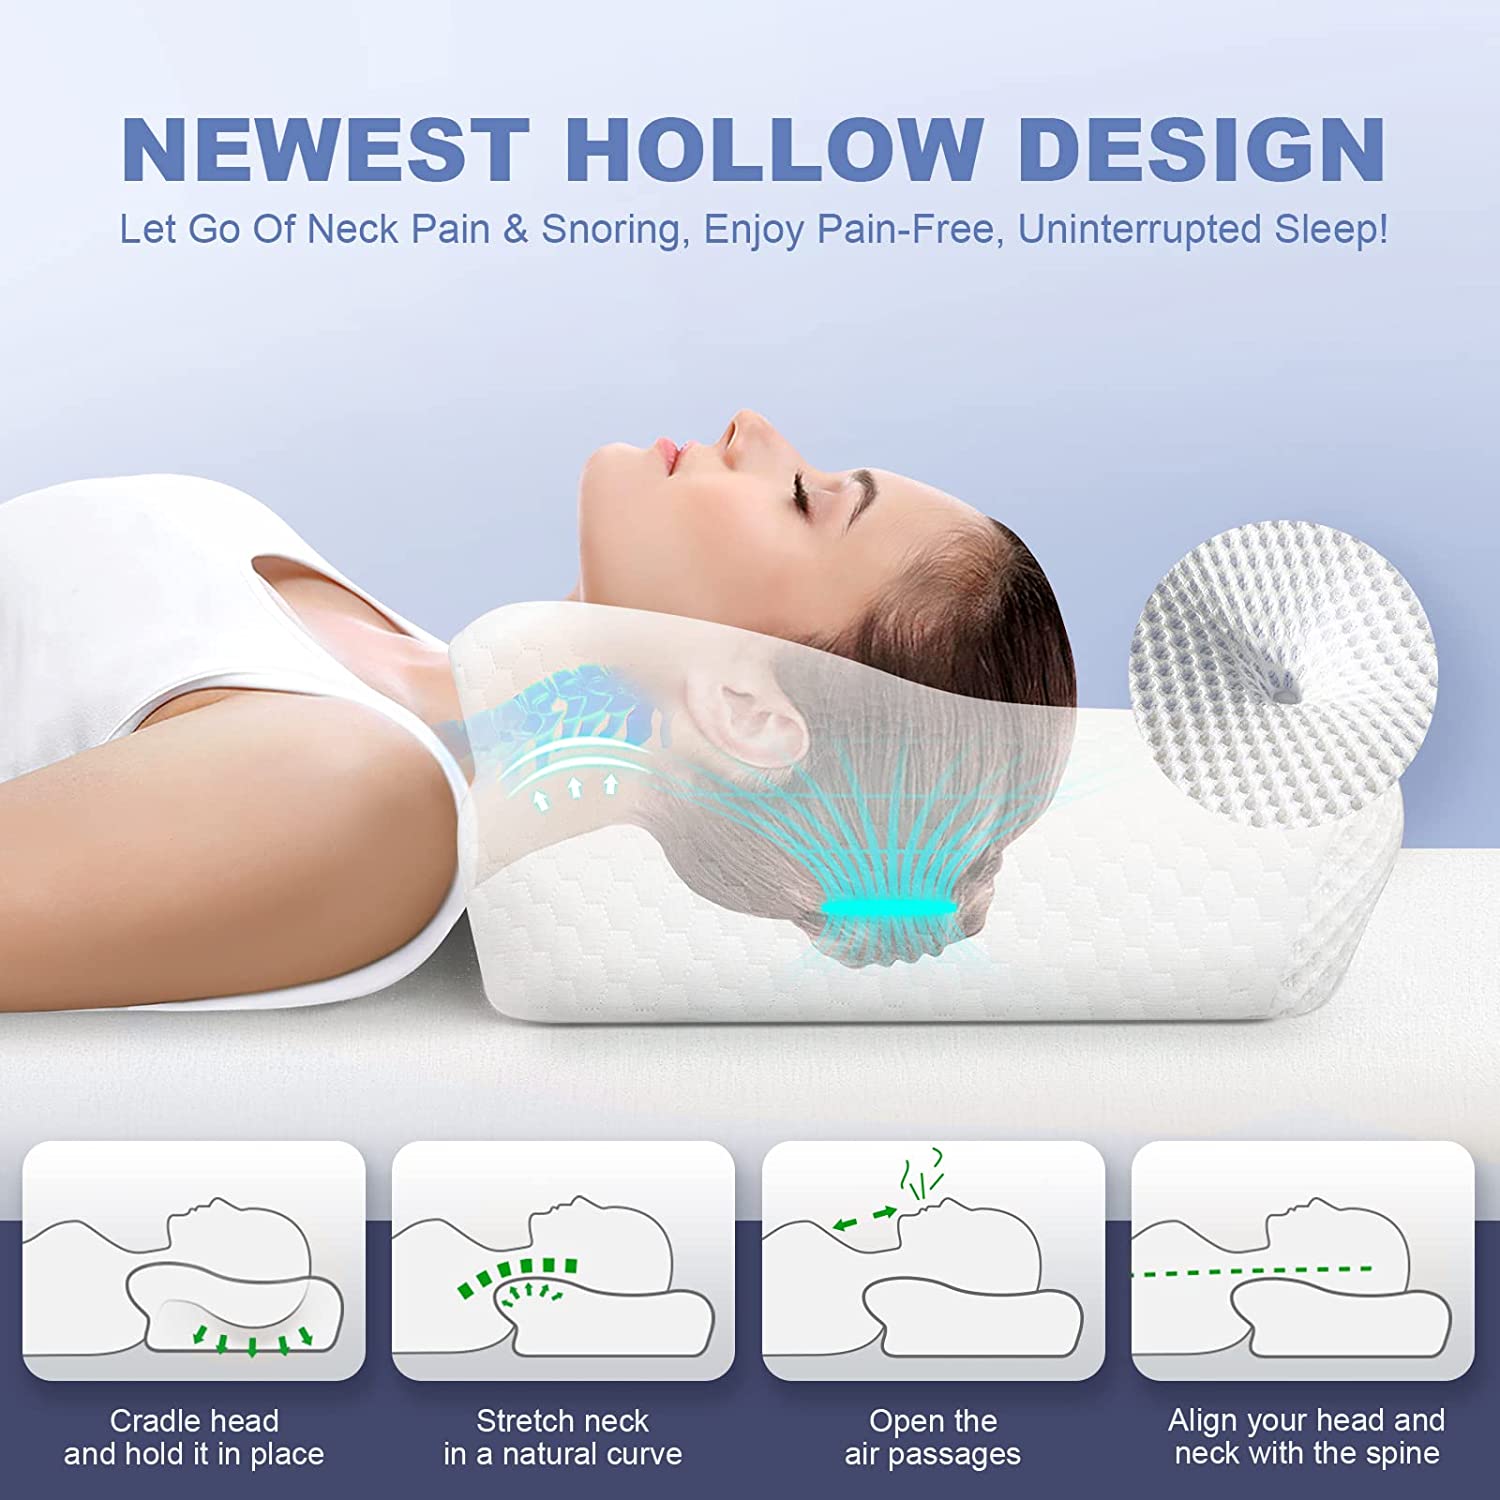 ALLJOYRR Adjustable Cervical Pillow for Neck Pain Relief, Hollow Contour Memory Foam Pillows Plus Support, Odorless Orthopedic Bed Pillows for Sleeping, Shoulder Pillow for Side Back Stomach Sleeper